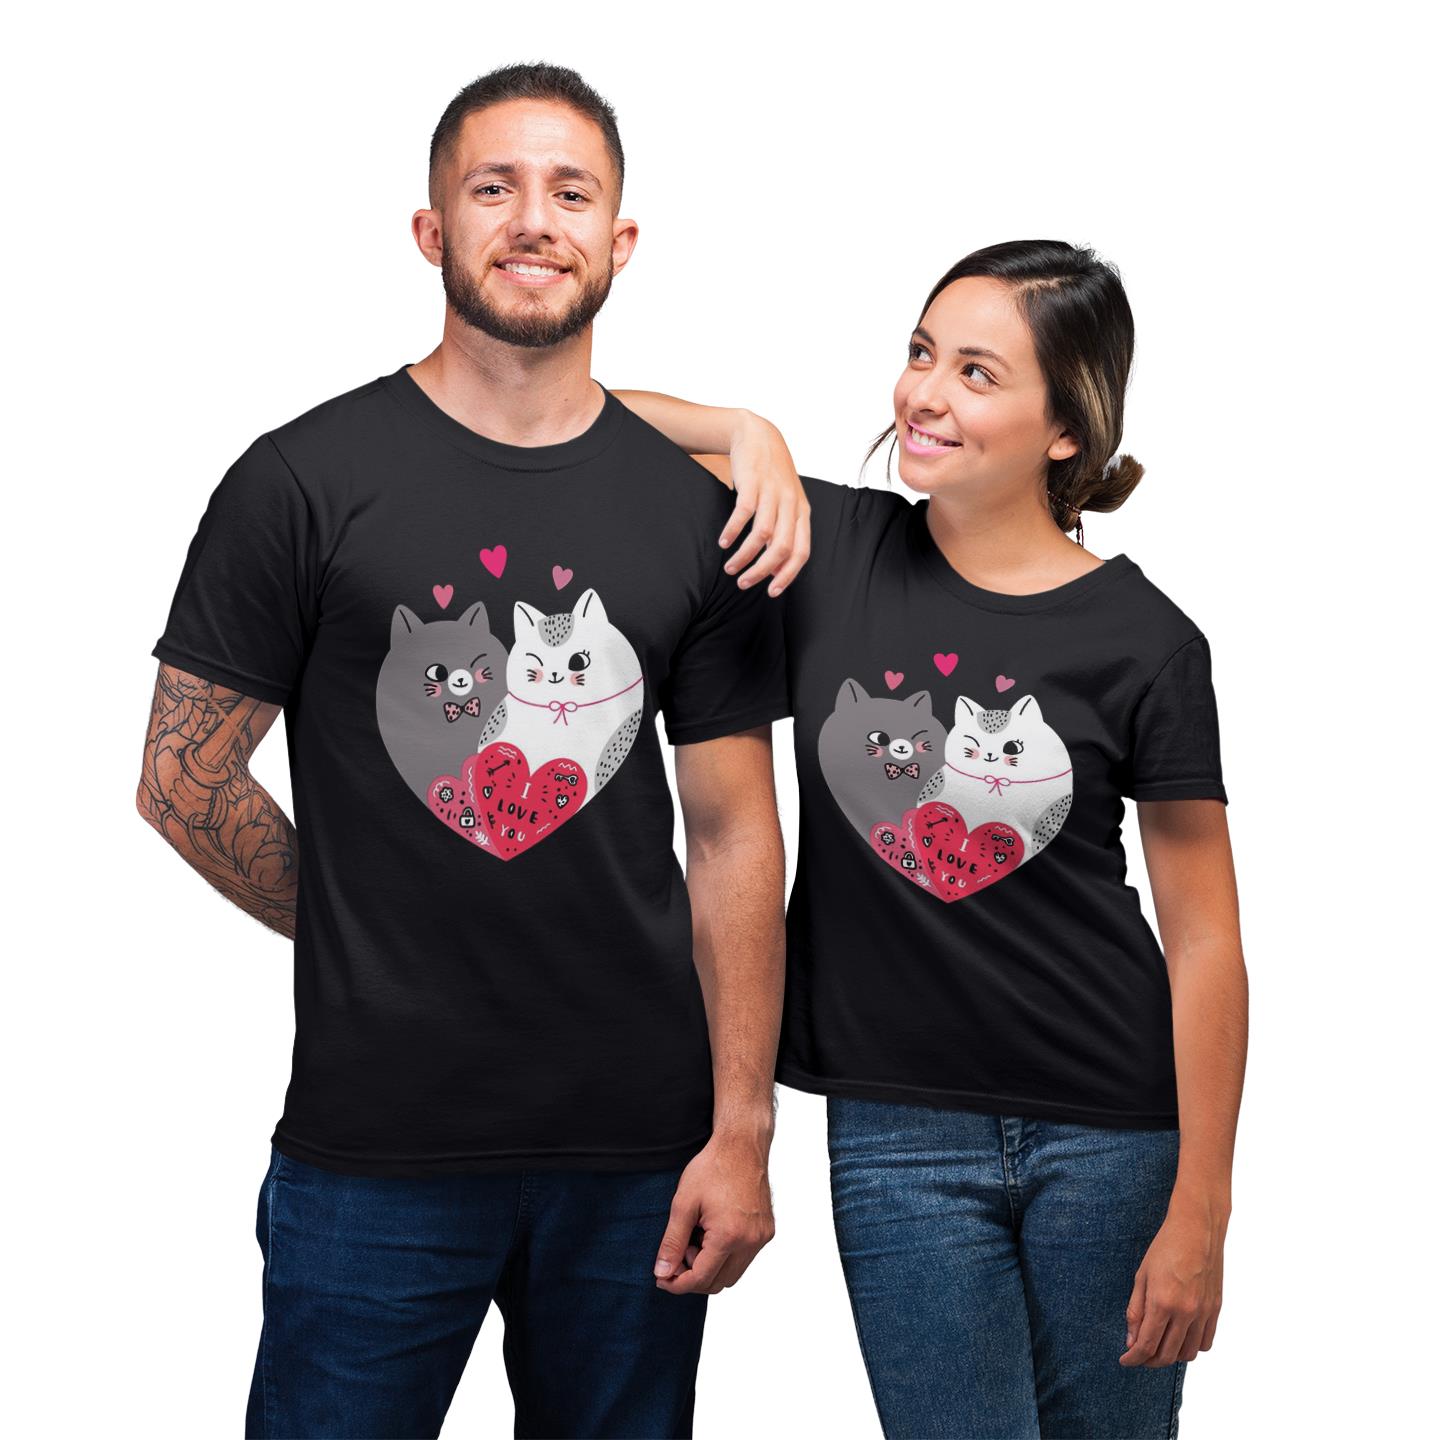 Heart Cat Lover I Love You His And Her Shirt For Couples Lover Matching T-shirt